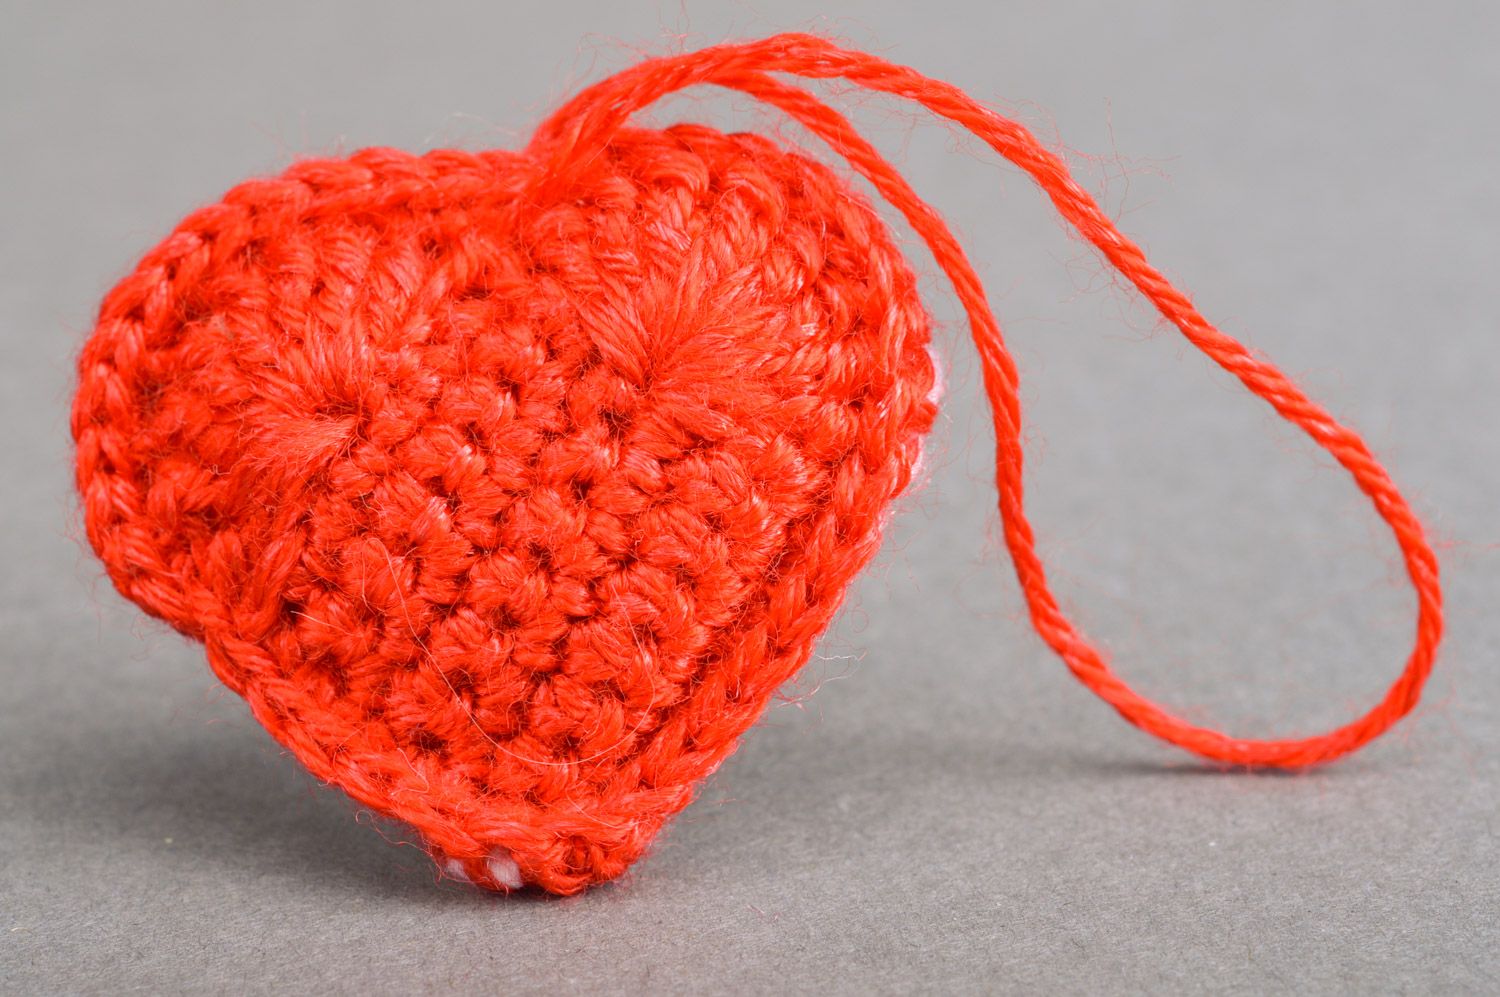 Handmade crochet interior wall hanging decoration Heart in red and white colors photo 5